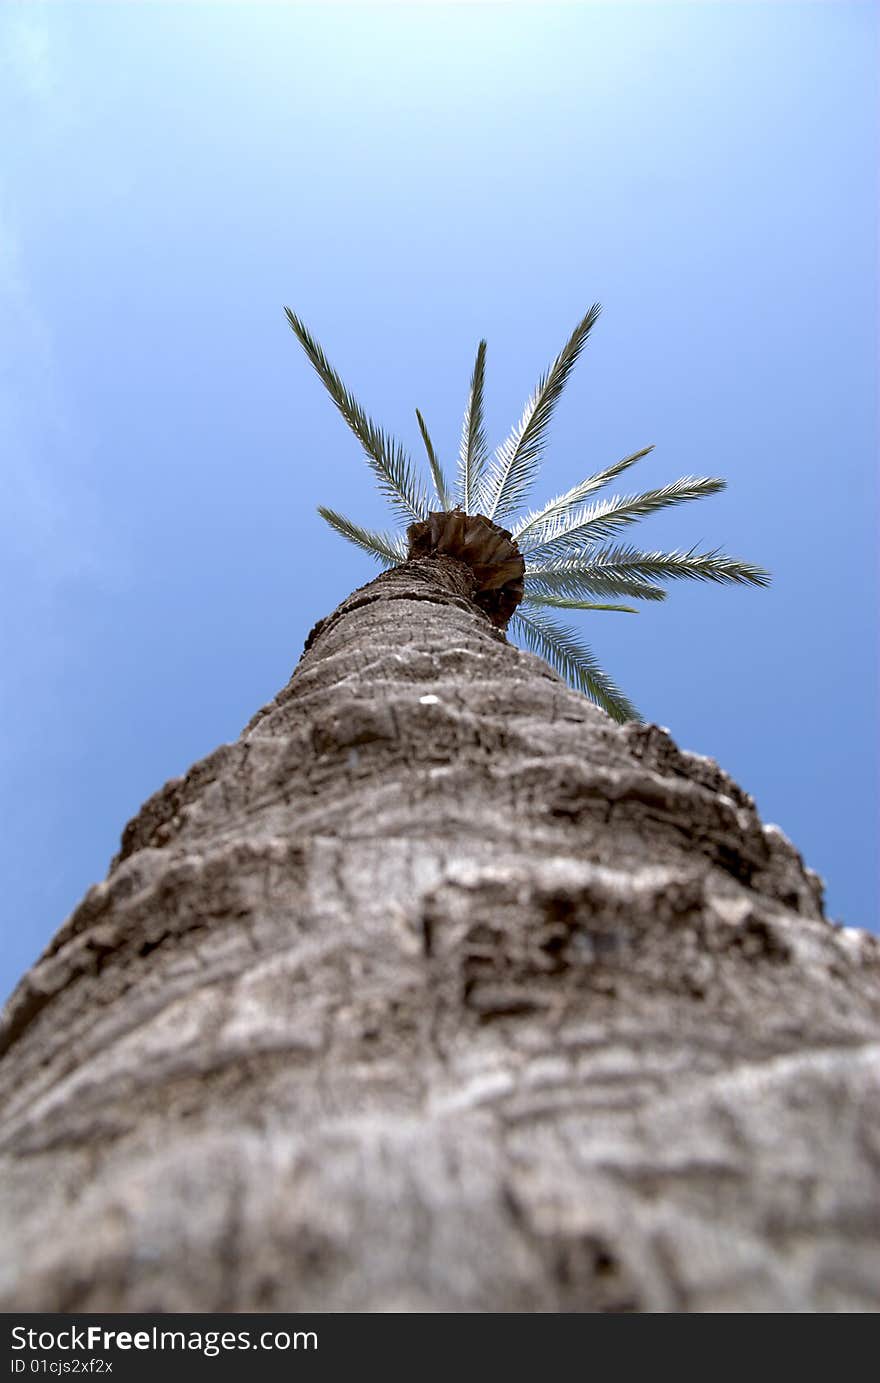 Bottom up view of the big dates tree in Israel national park.